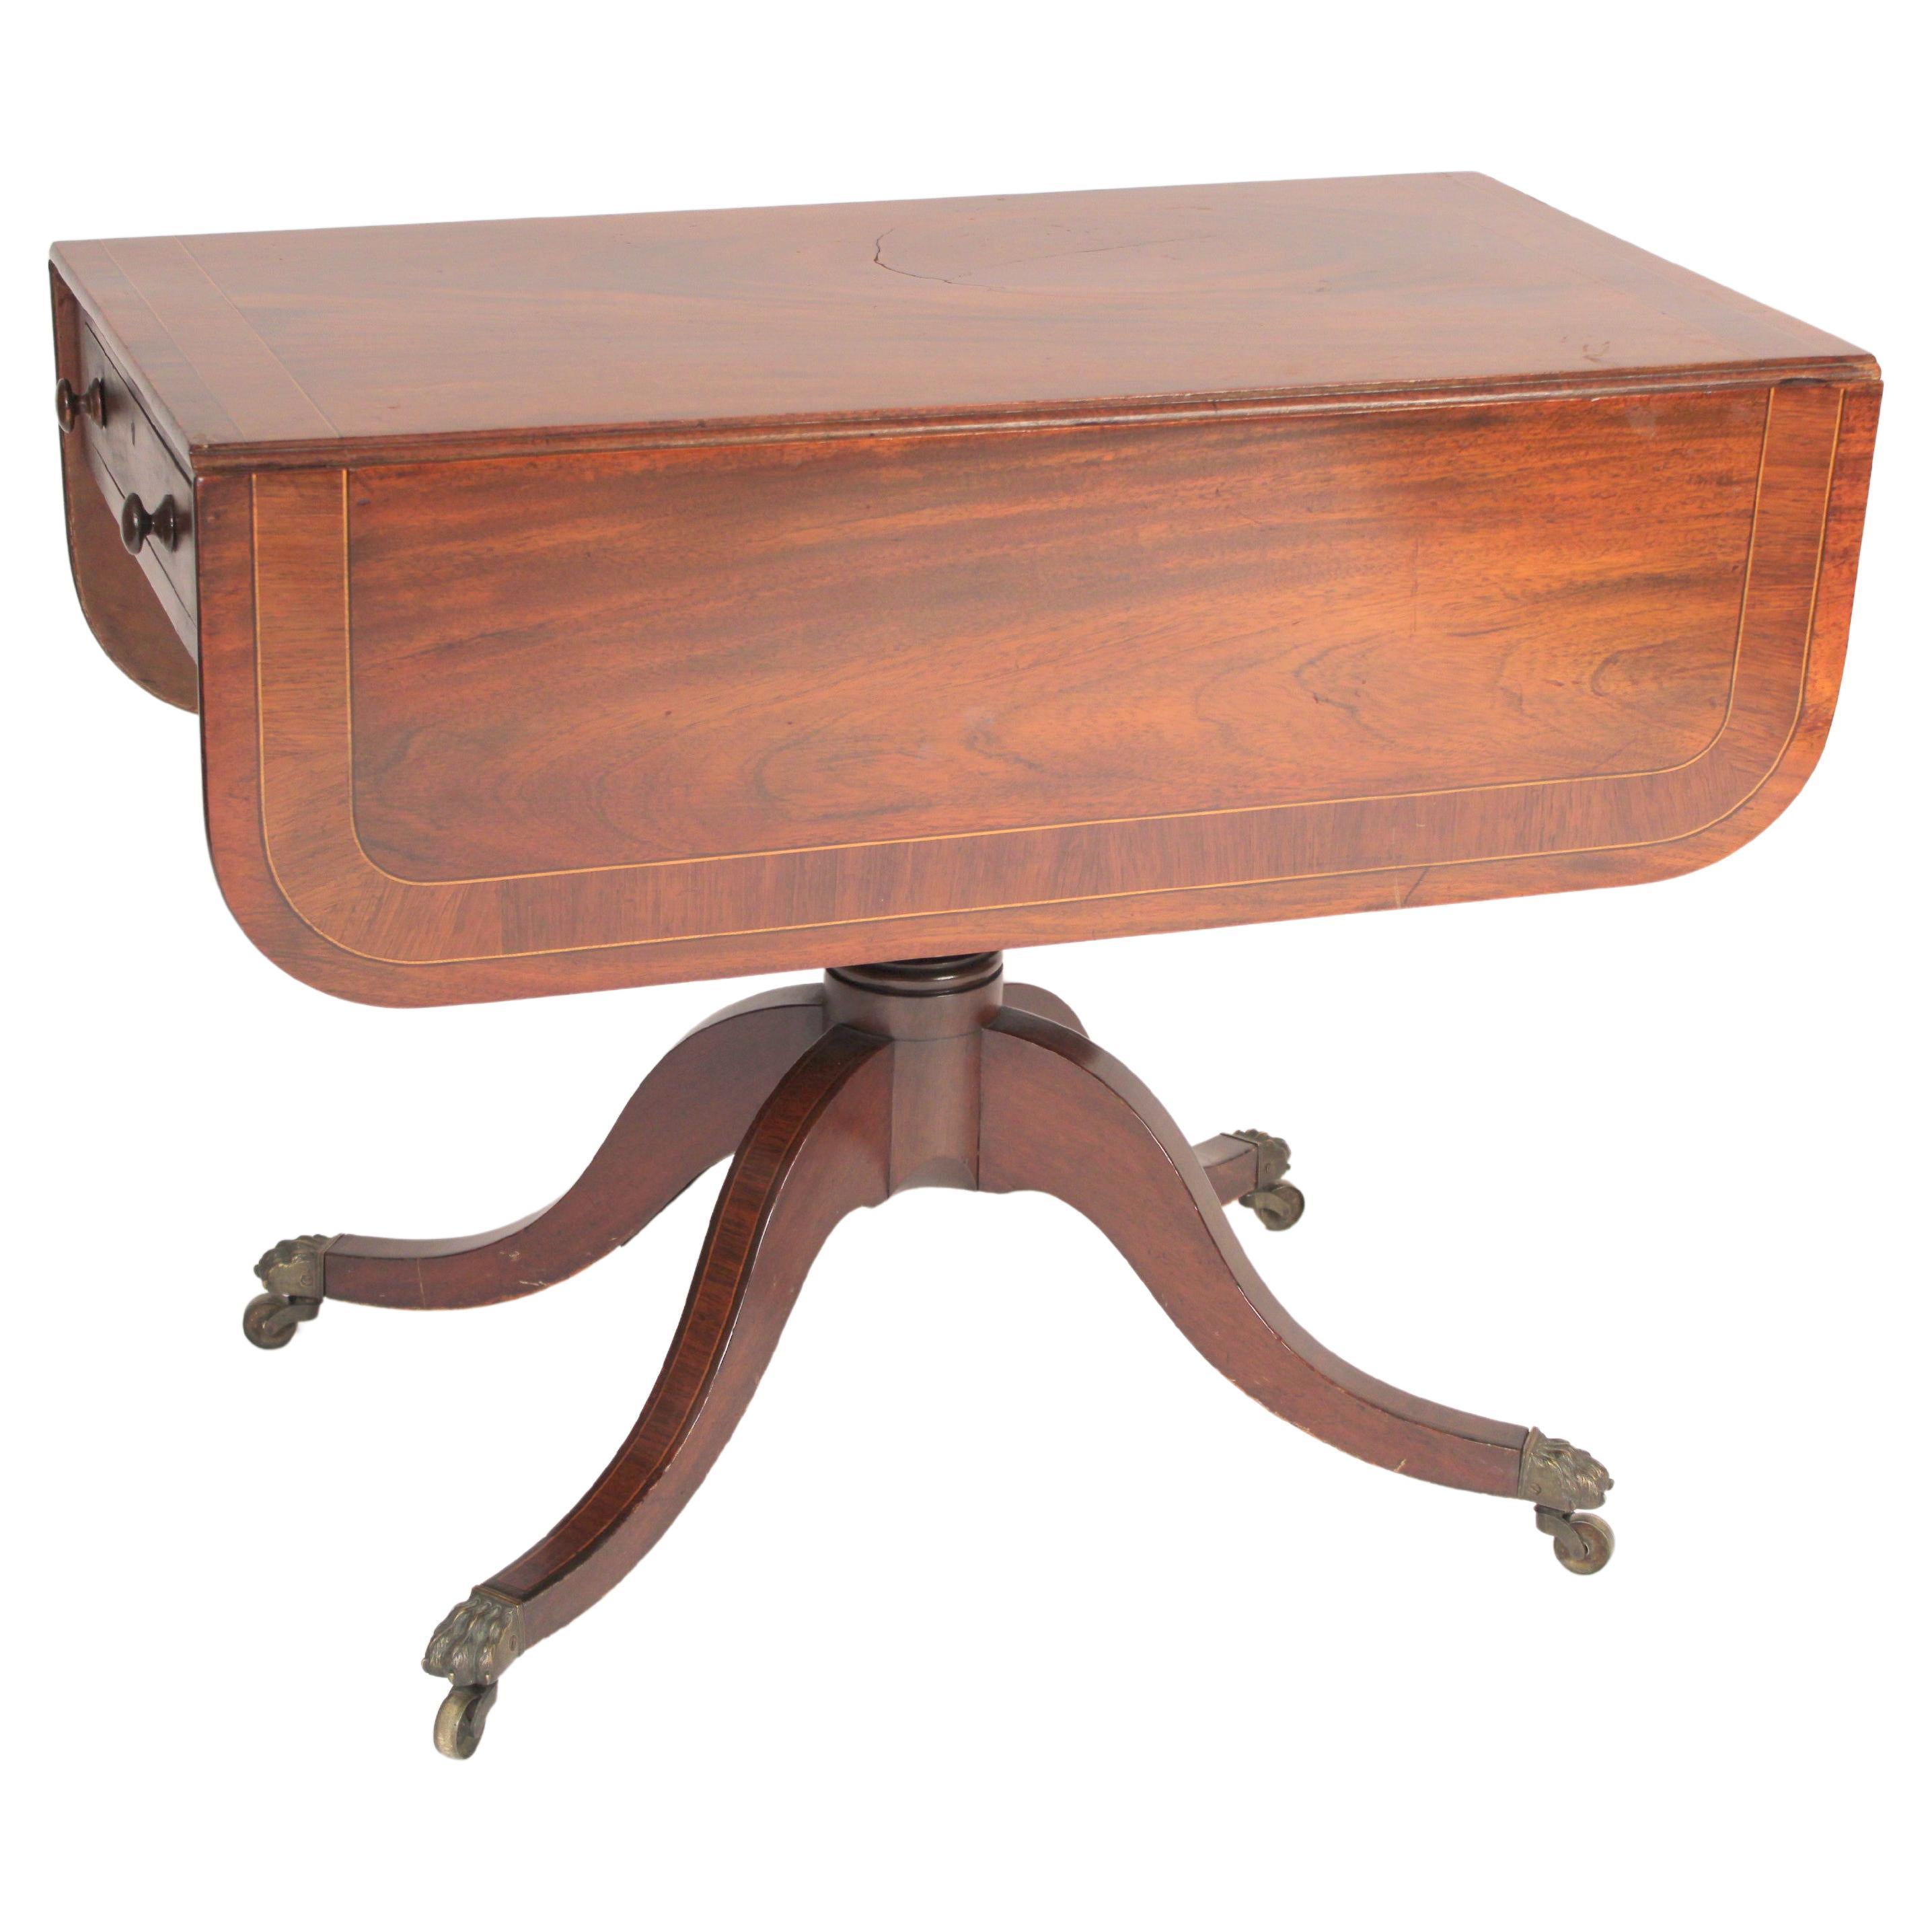 English Regency Mahogany Drop Leaf Occasional Table For Sale